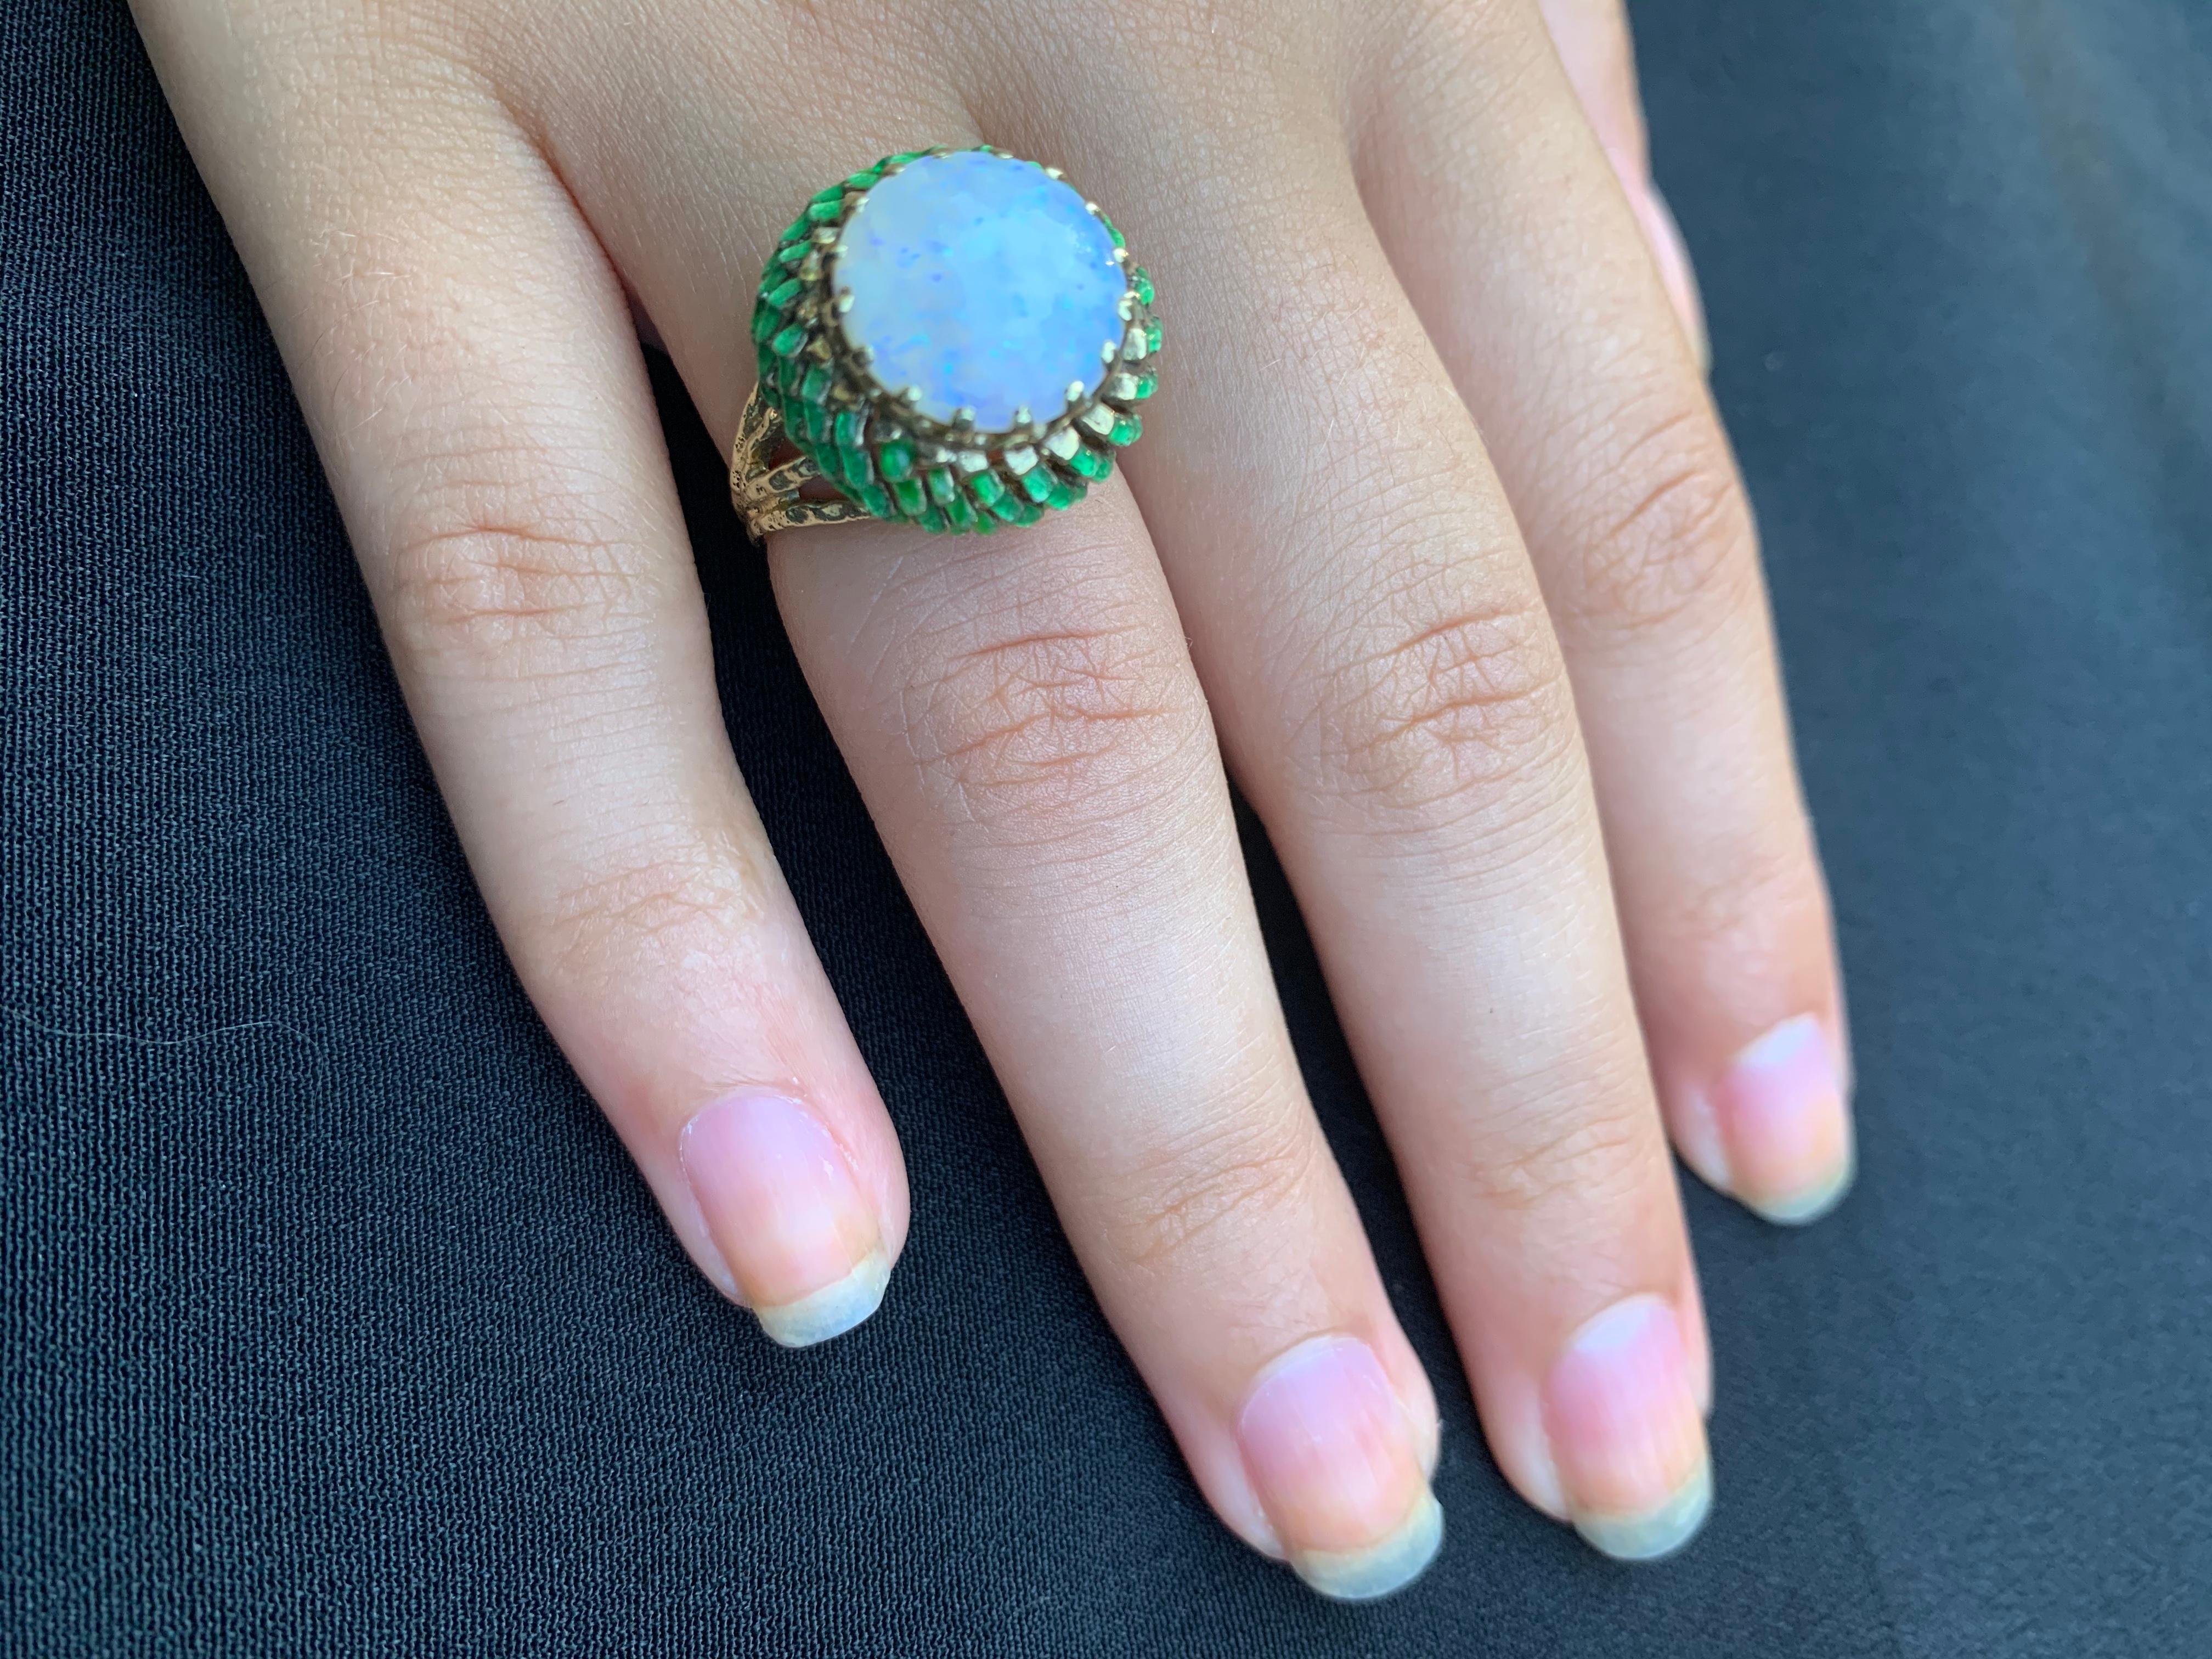 Very unusual vintage Thistle ring with a large round cabochon opal center (12mm in diameter) set in an intricate 14K yellow gold and green enamel setting representing the calyx portion of the flower, with naturalistic gold stems, eight in total,